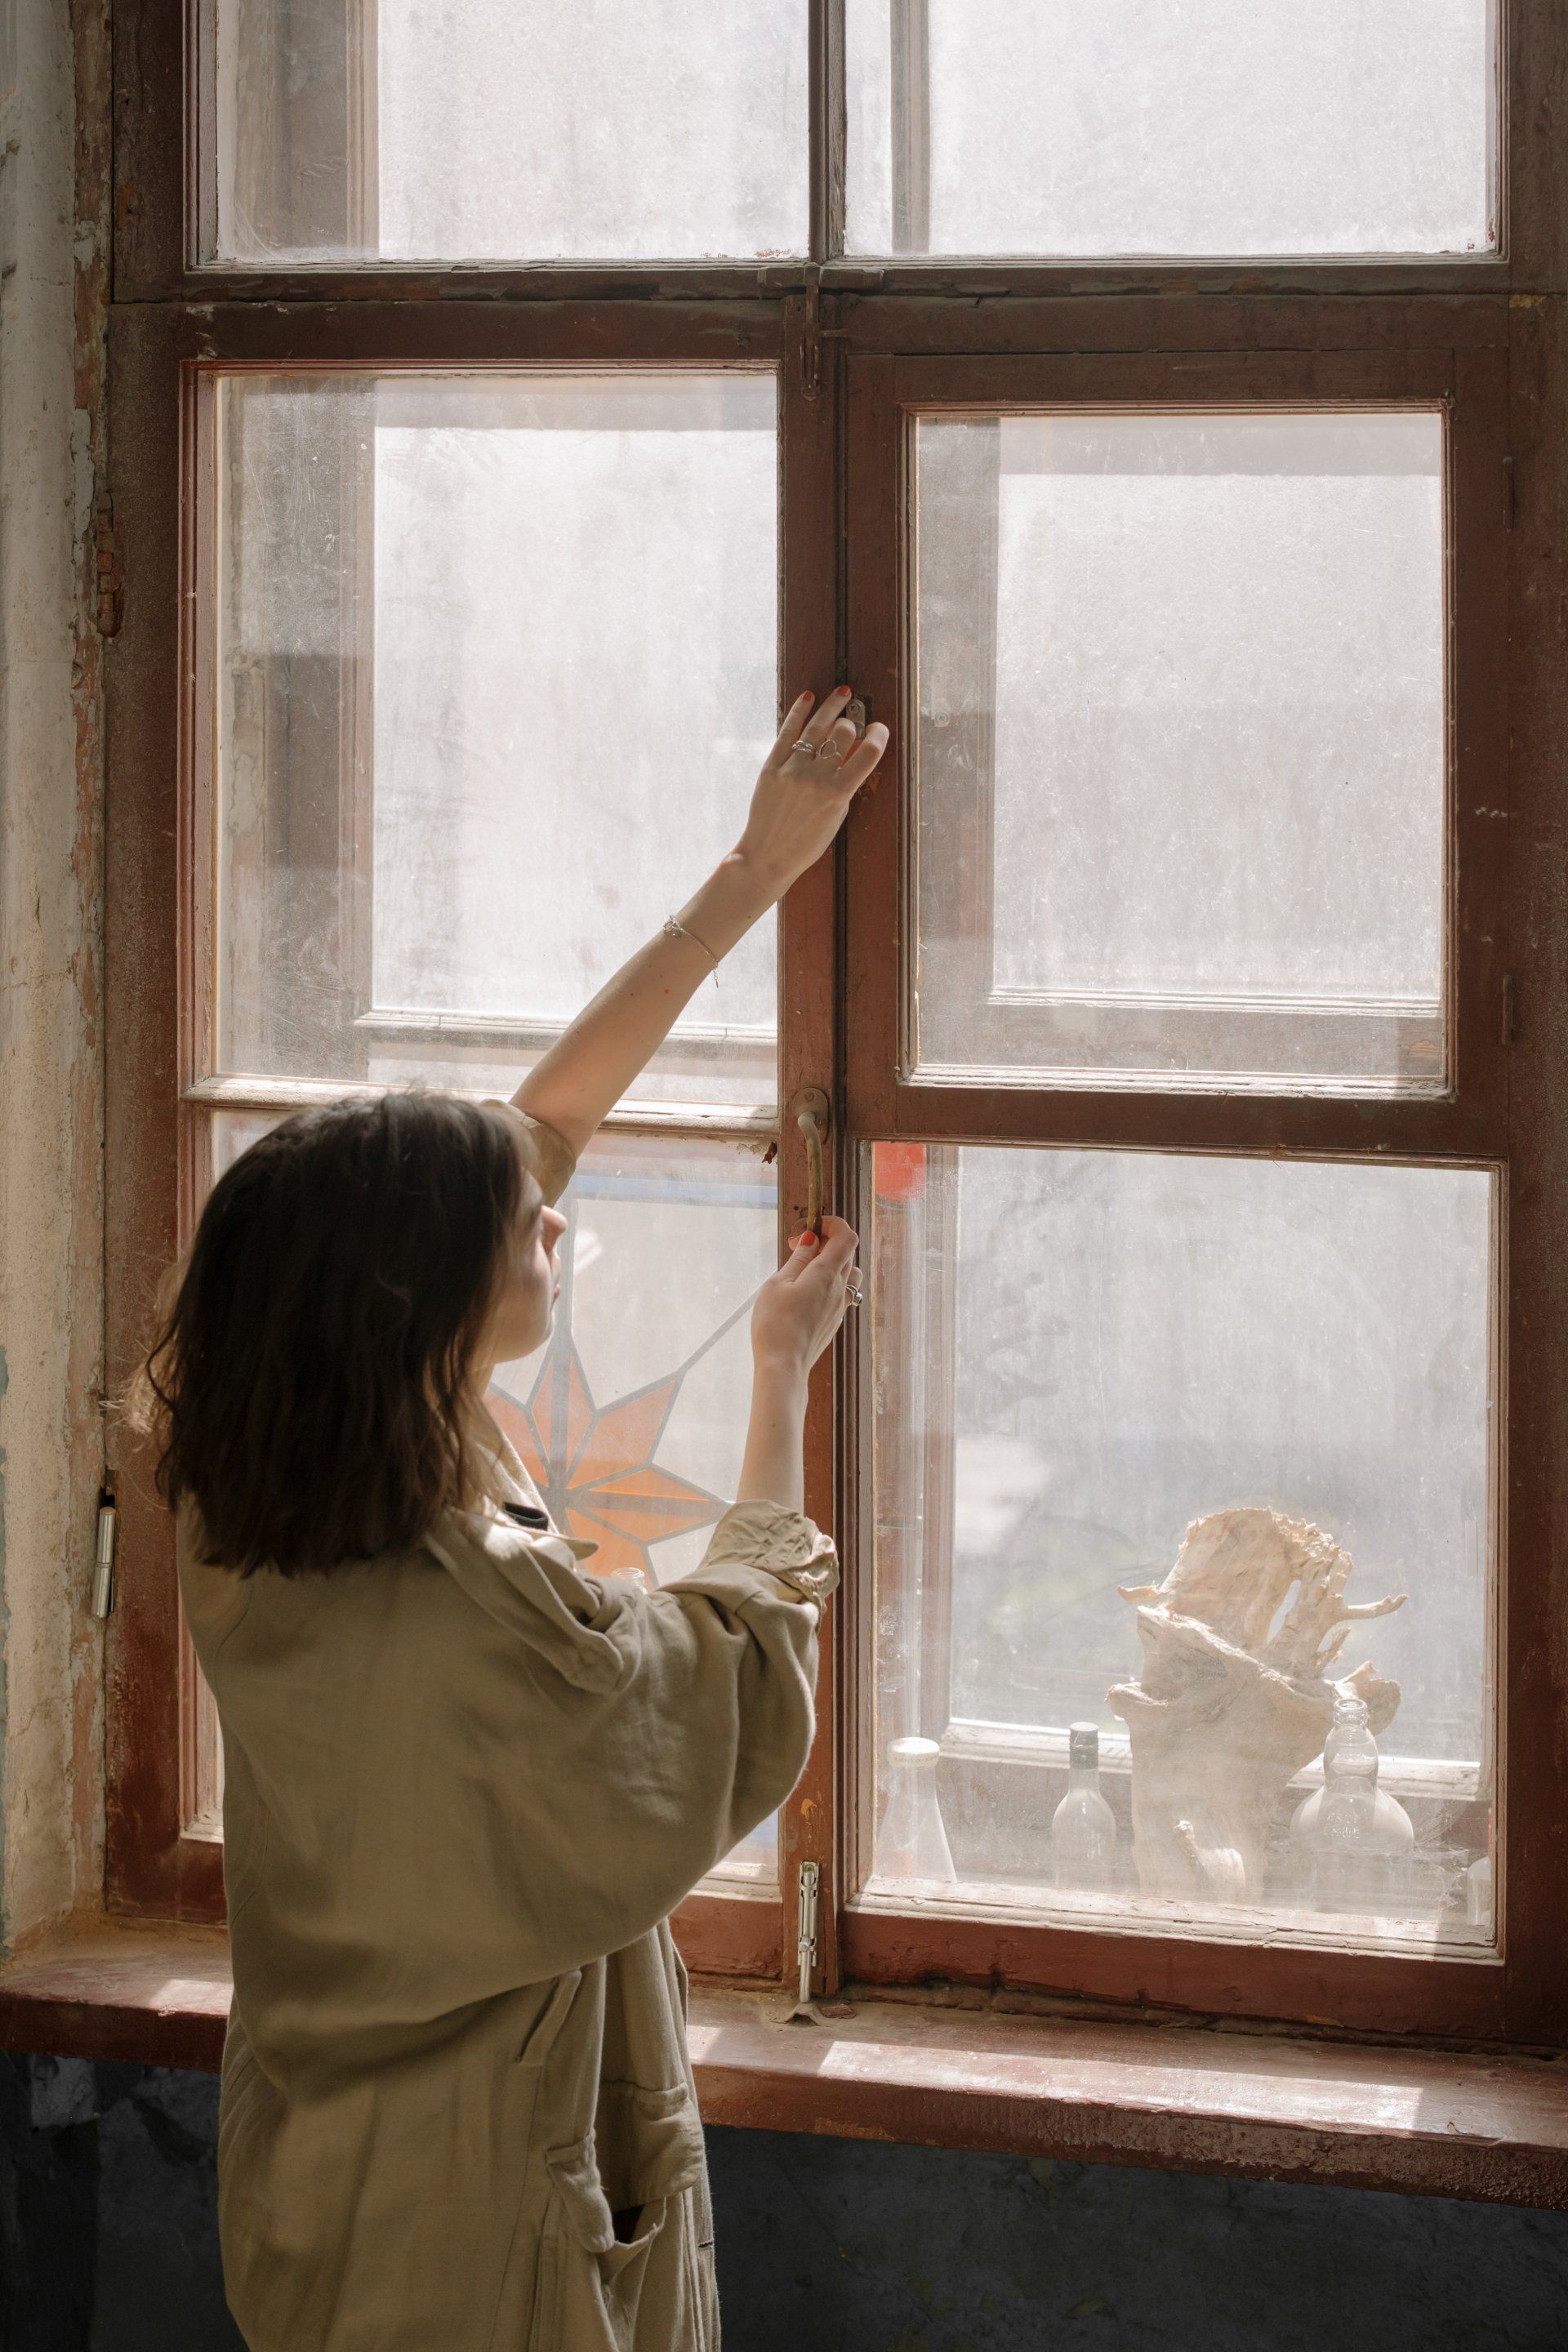 A woman standing in front of a window about to open it.